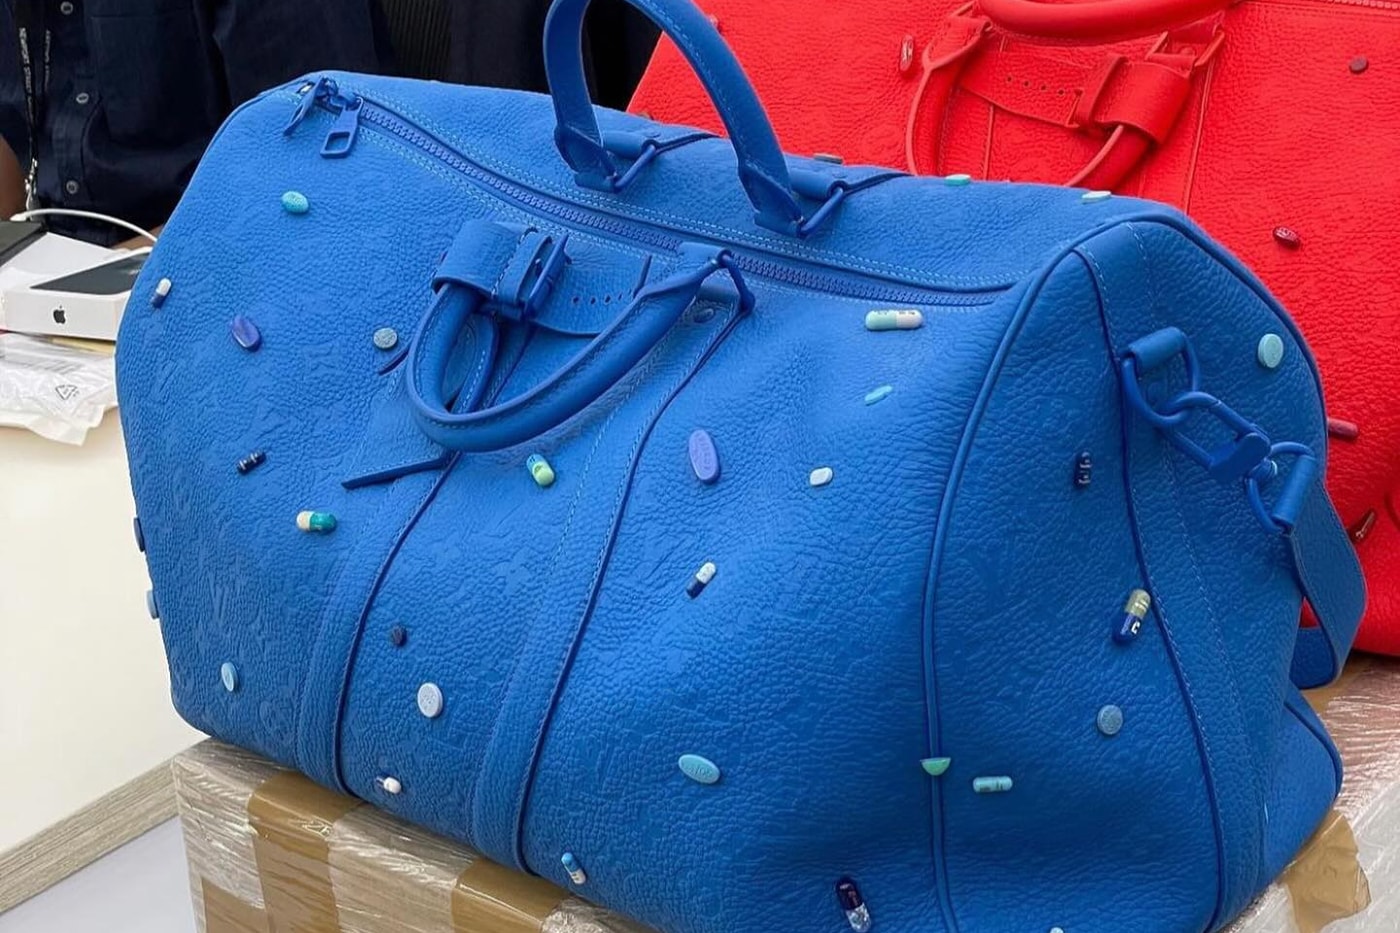 First Look at the Rumored Damien Hirst x Louis Vuitton Keepall Bag pharrell williams menswear pills collaboration juxtaposition blue red 